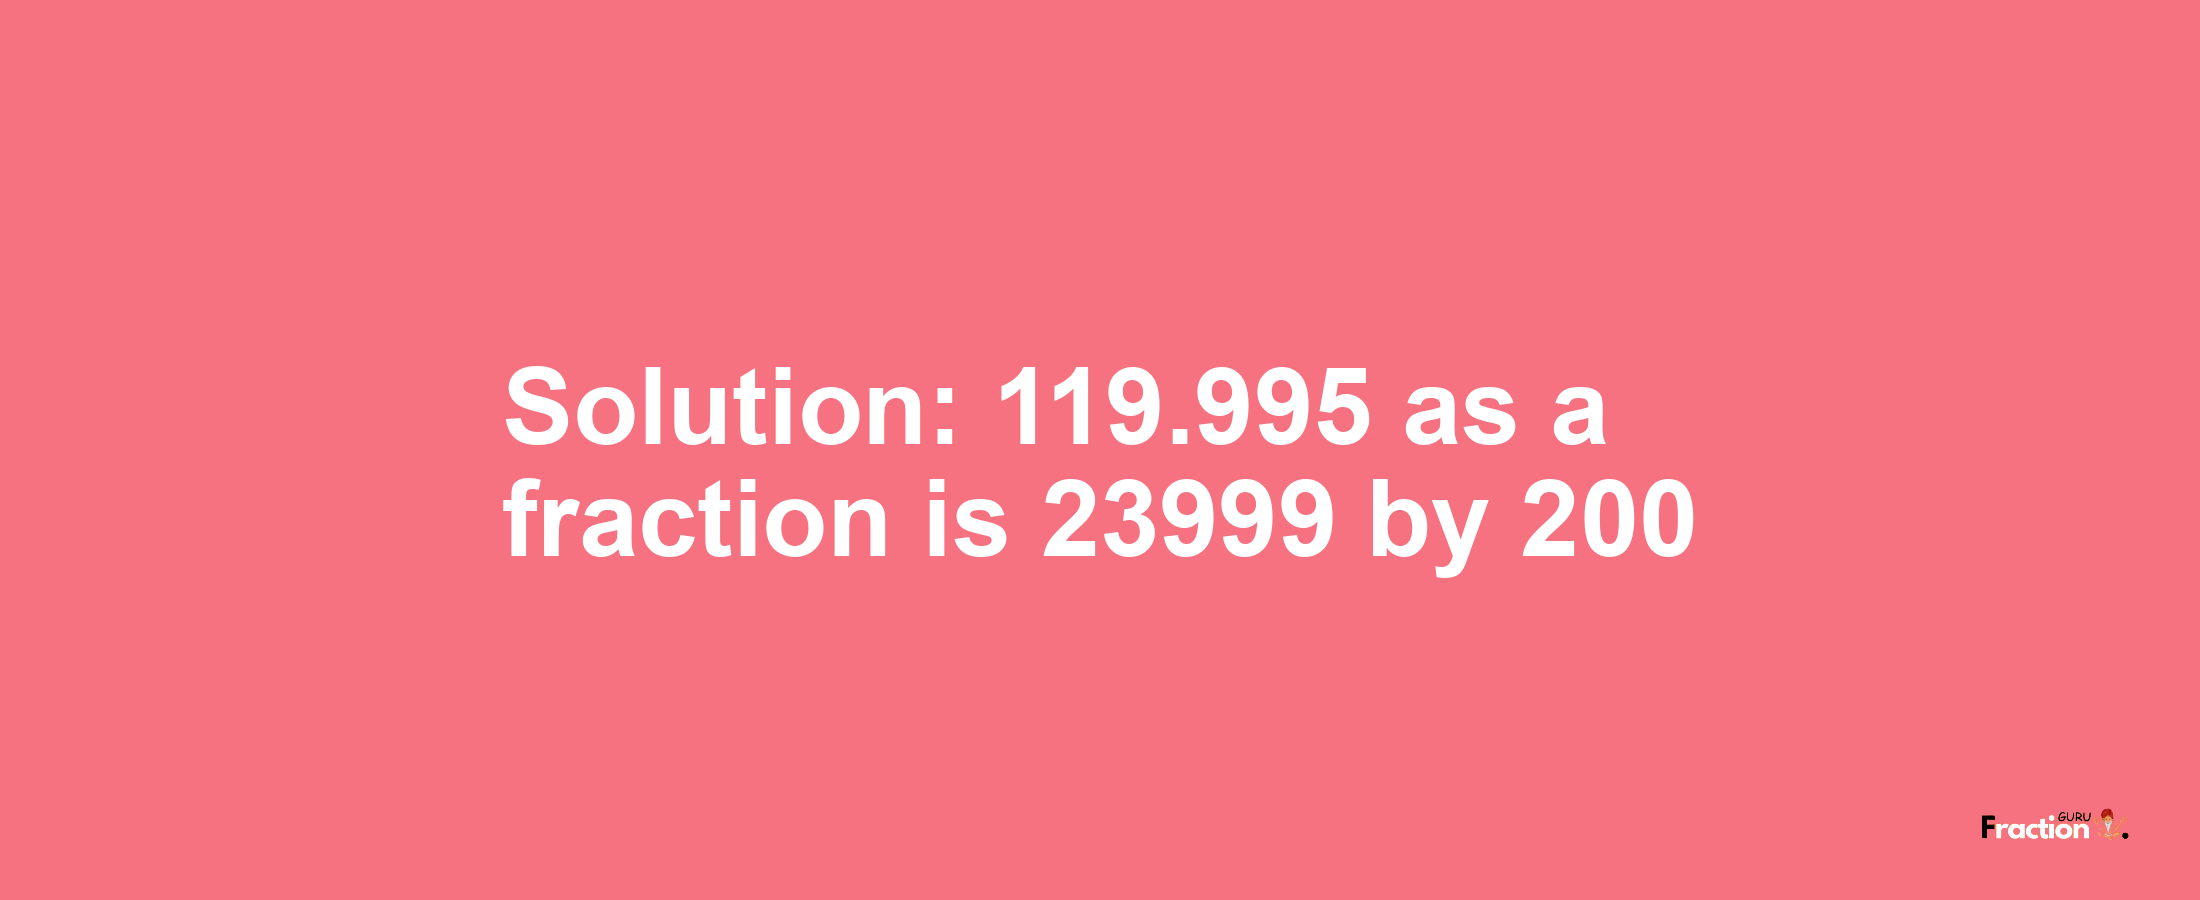 Solution:119.995 as a fraction is 23999/200